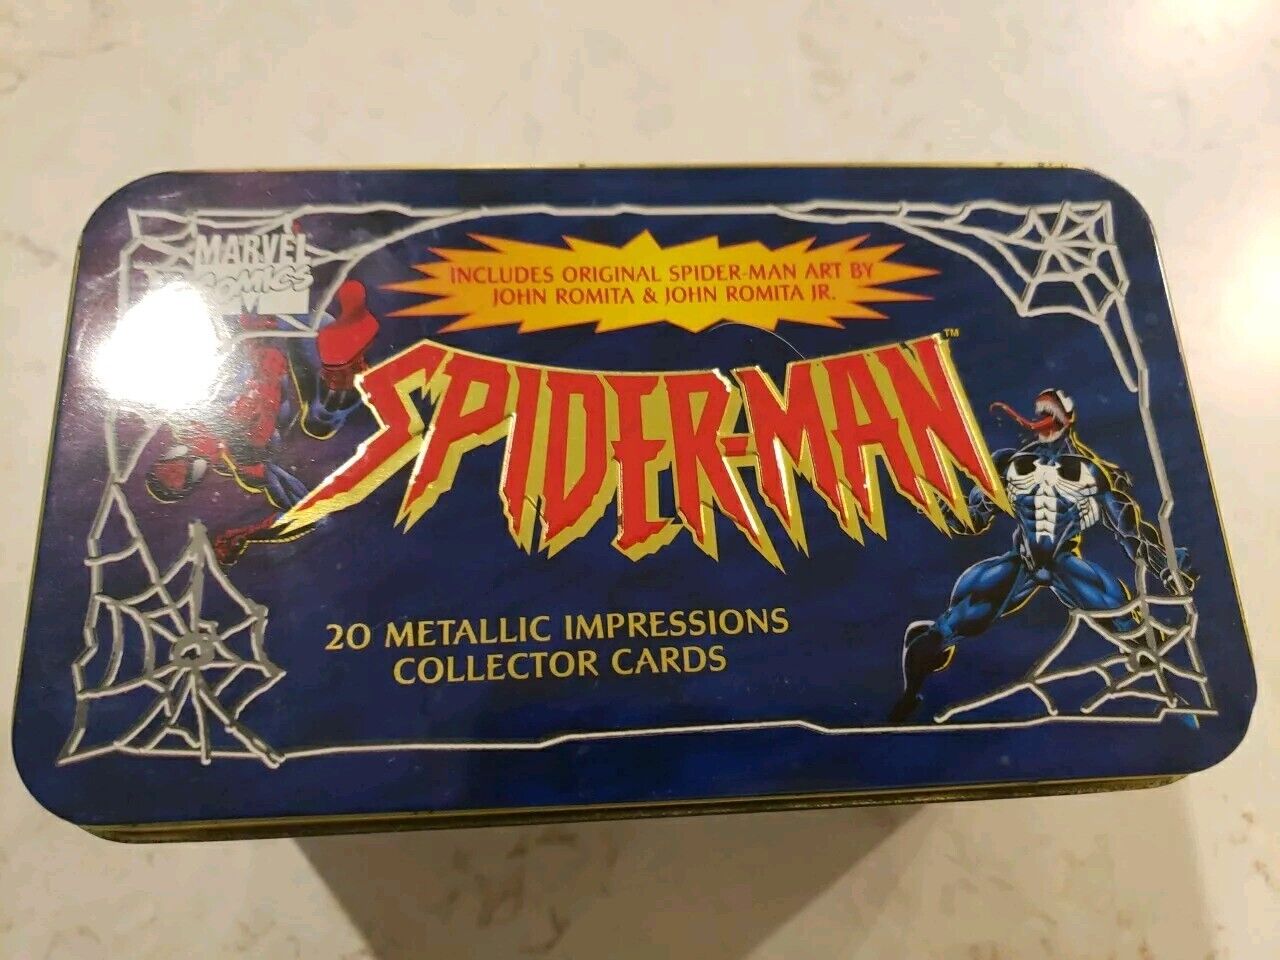 1996 Metallic Impressions Spider-Man 20 Collector Cards Set In Tin Limited Ed.